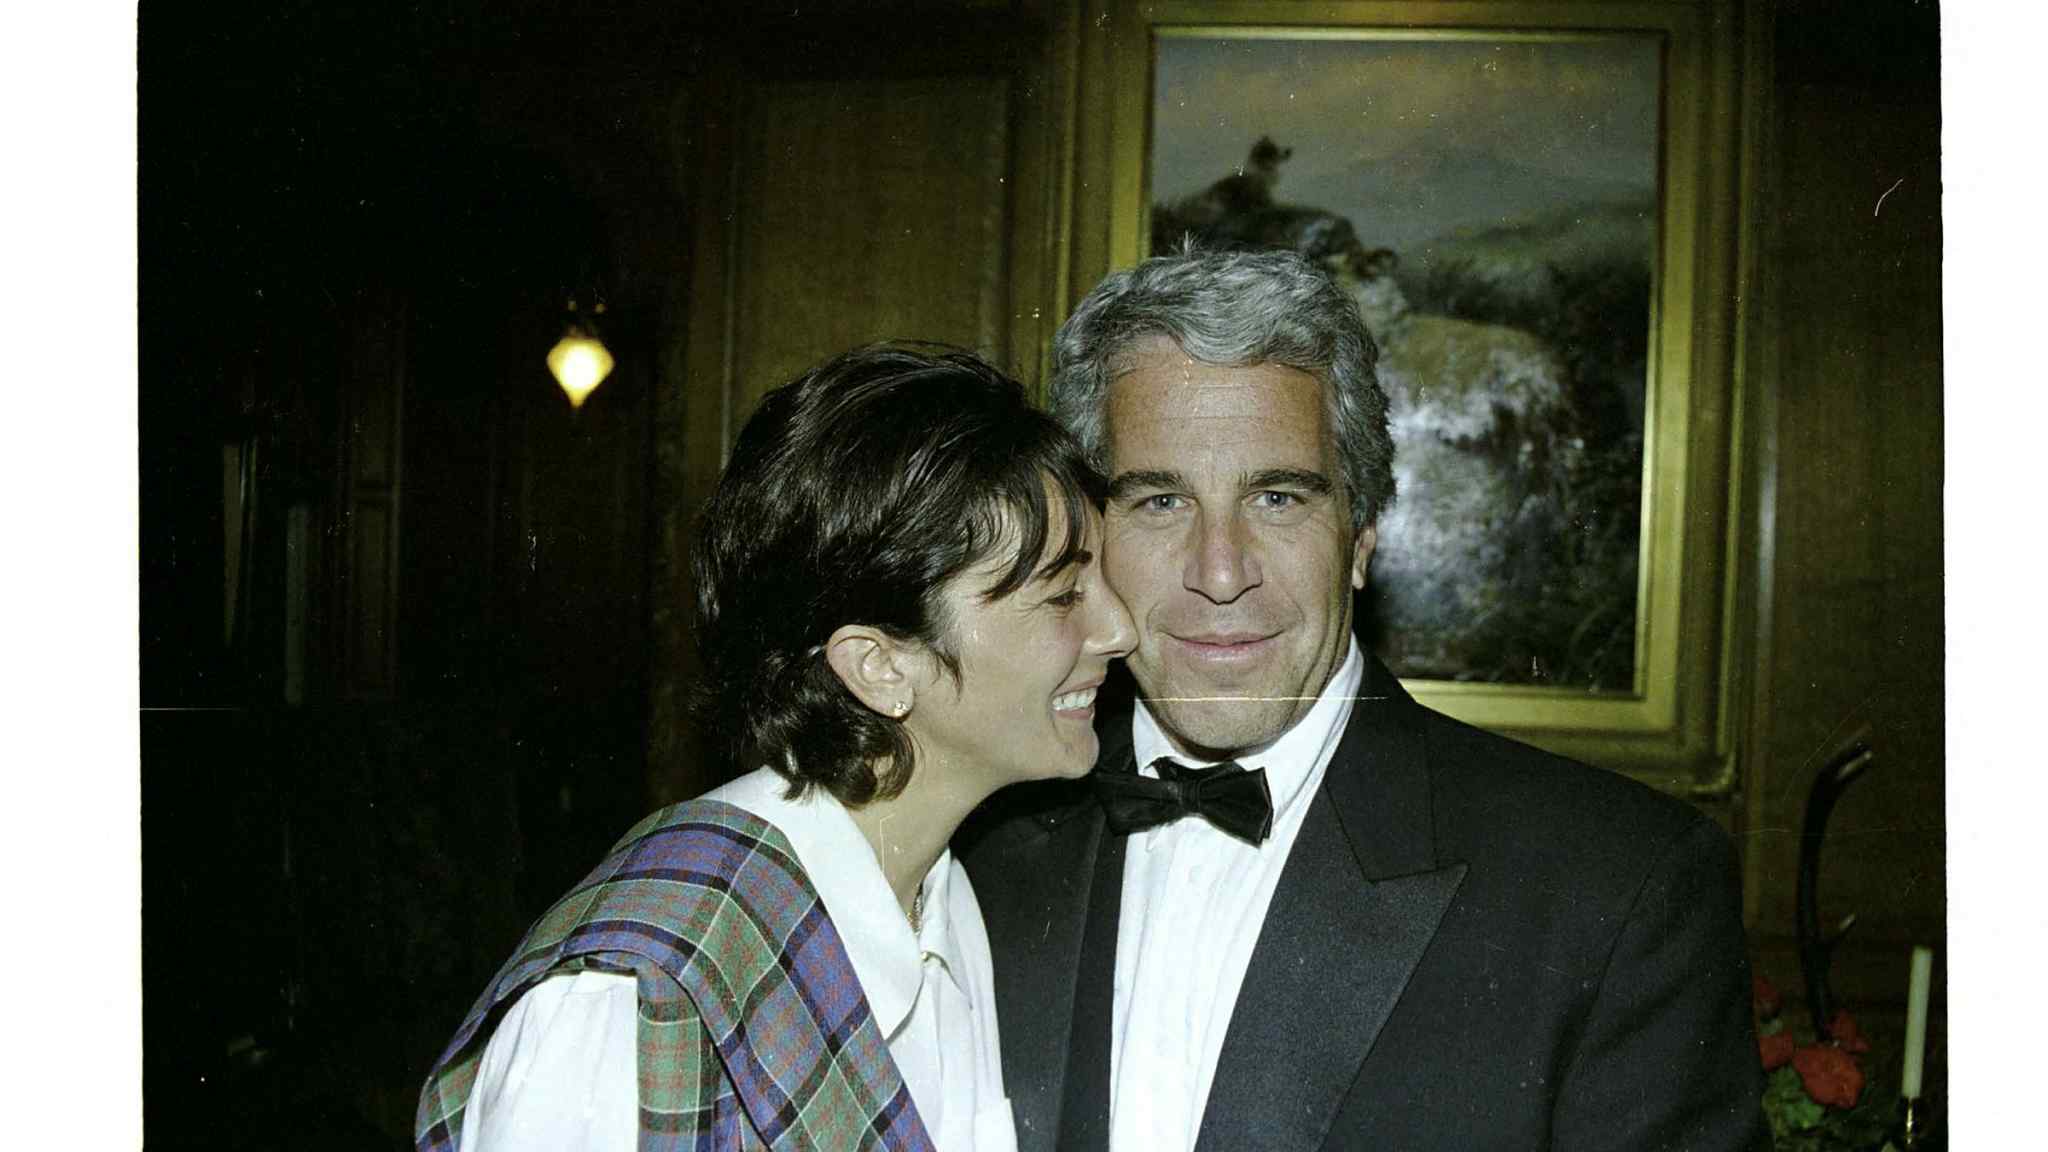 Ghislaine Maxwell sentenced to 20 years for aiding Epstein’s abuse